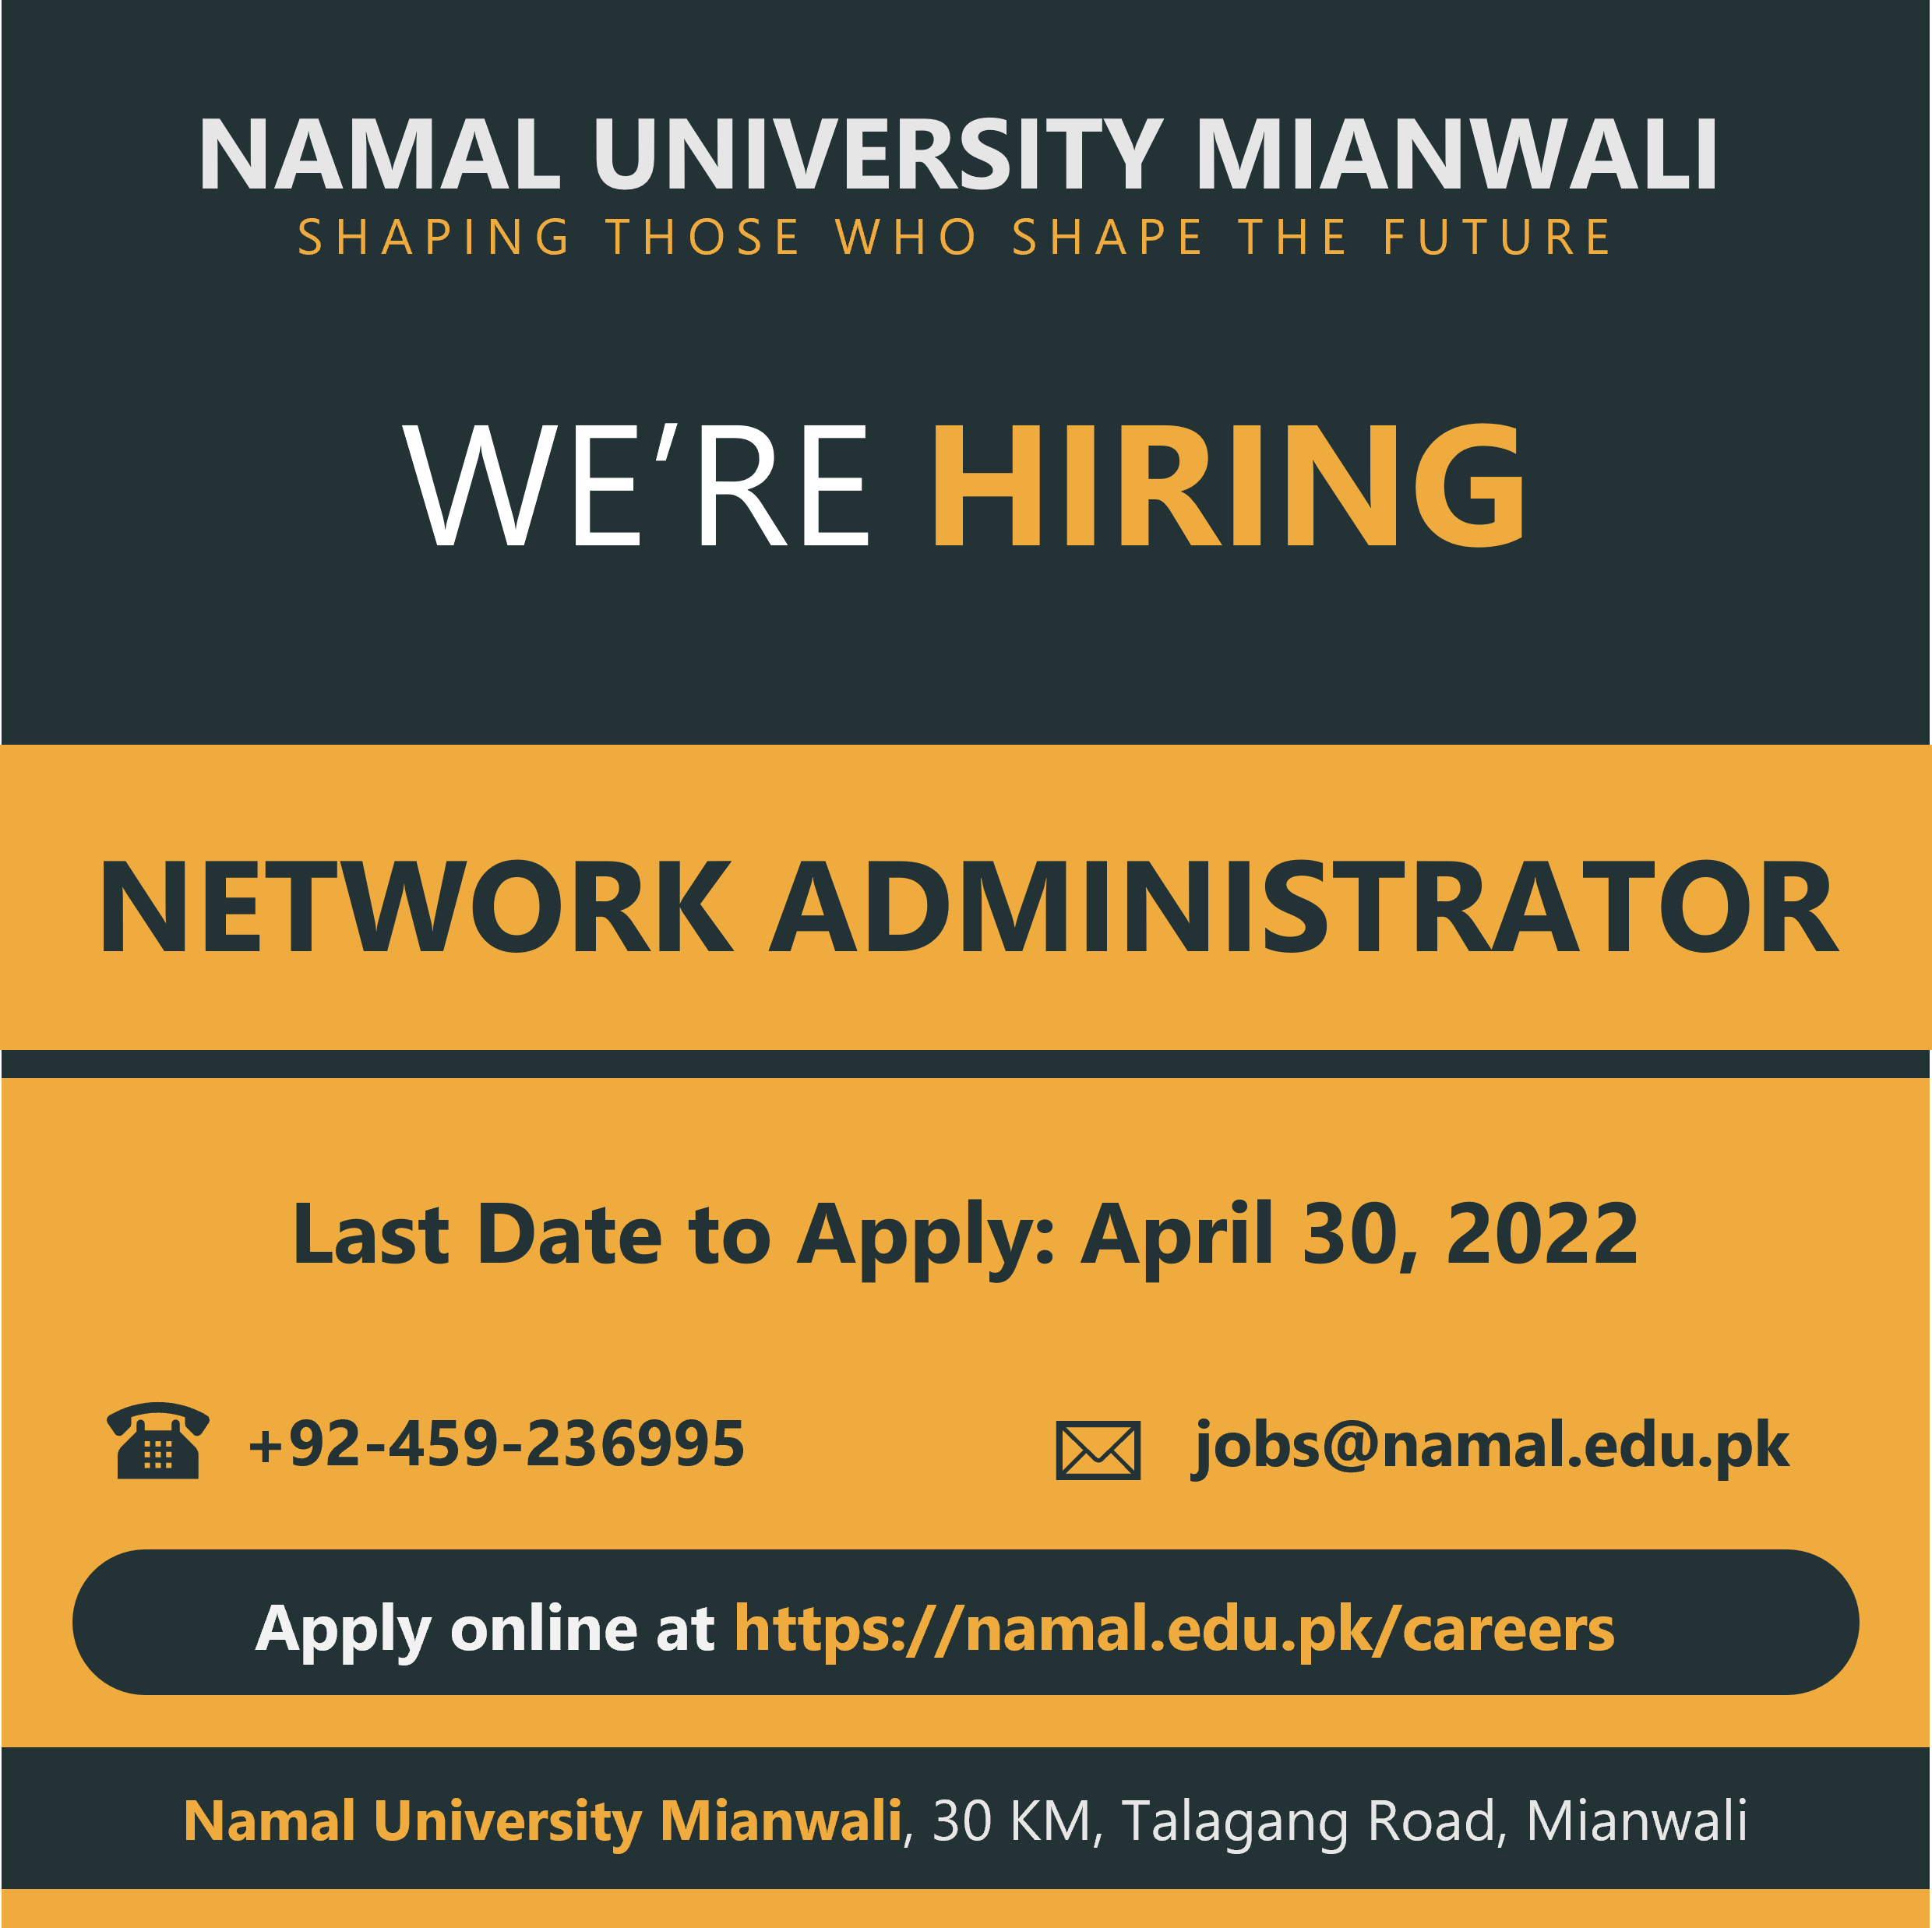 We are hiring! NETWORK ADMINISTRATOR